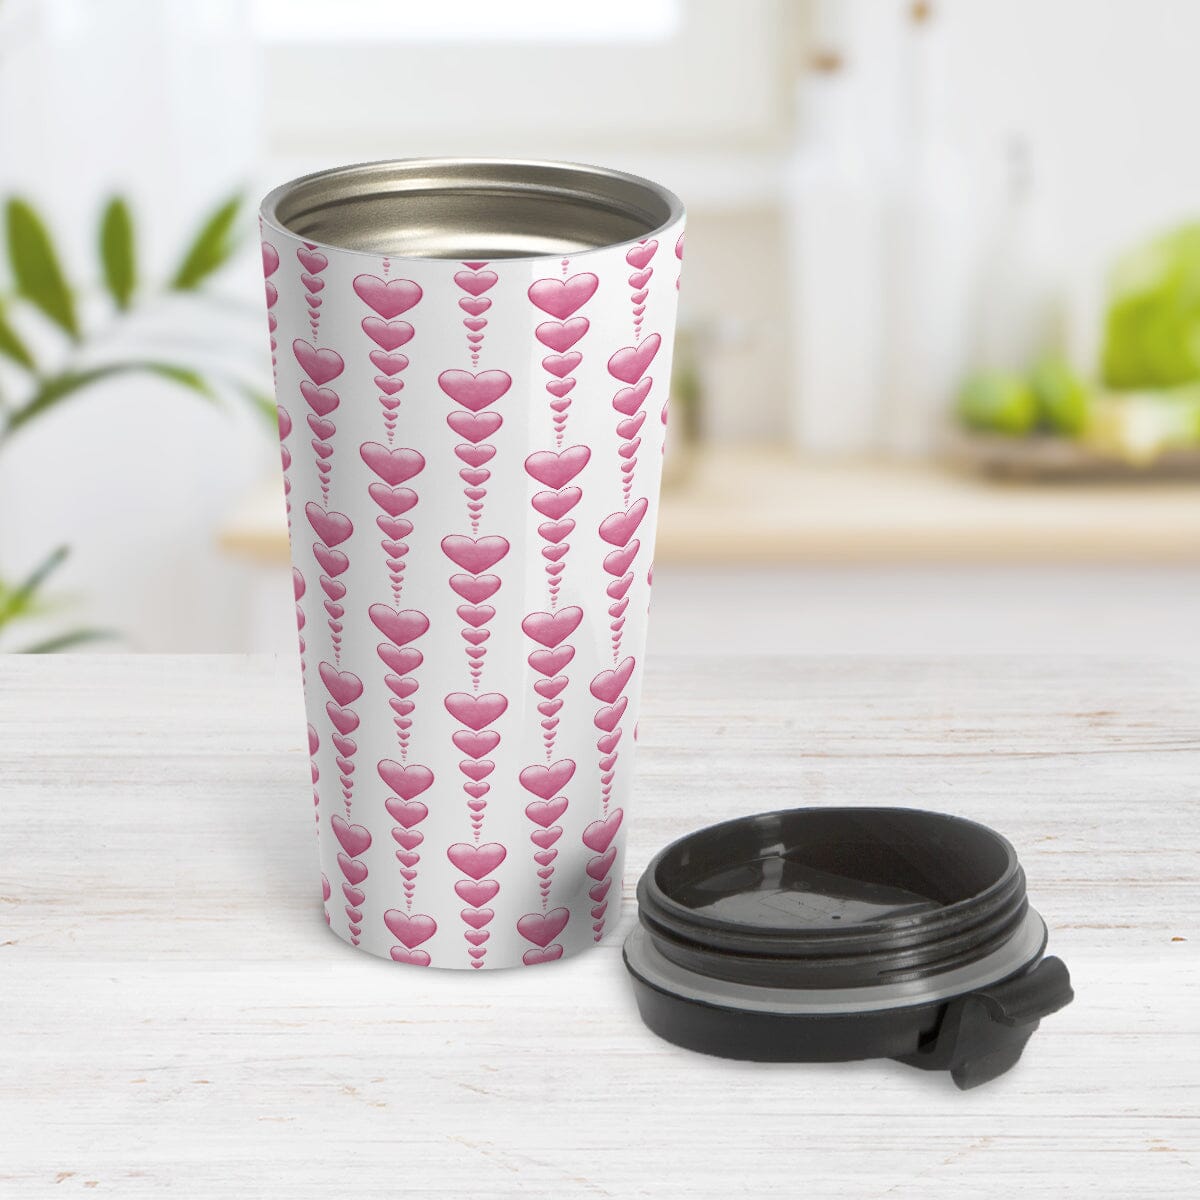 Heart Strings Travel Mug at Amy's Coffee Mugs. A stainless steel insulated travel mug designed with strings of pink hearts descending in size in a pattern that wraps around the mug. Photo shows the travel mug open with the lid on the table beside it.